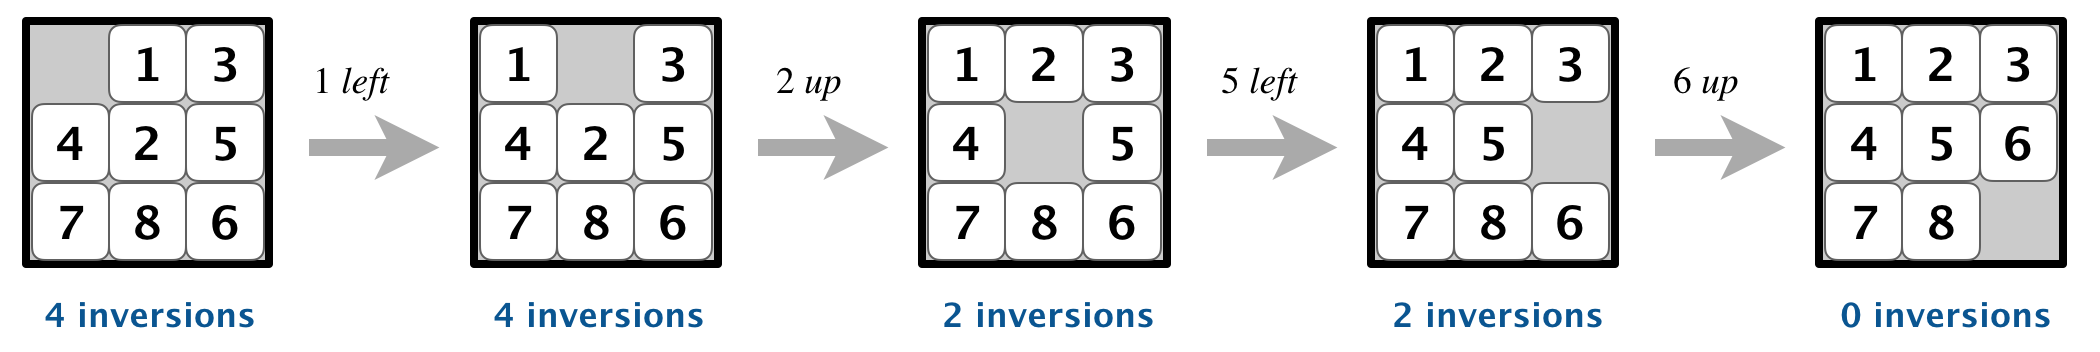 number of inversions changes by an even amount when n is odd